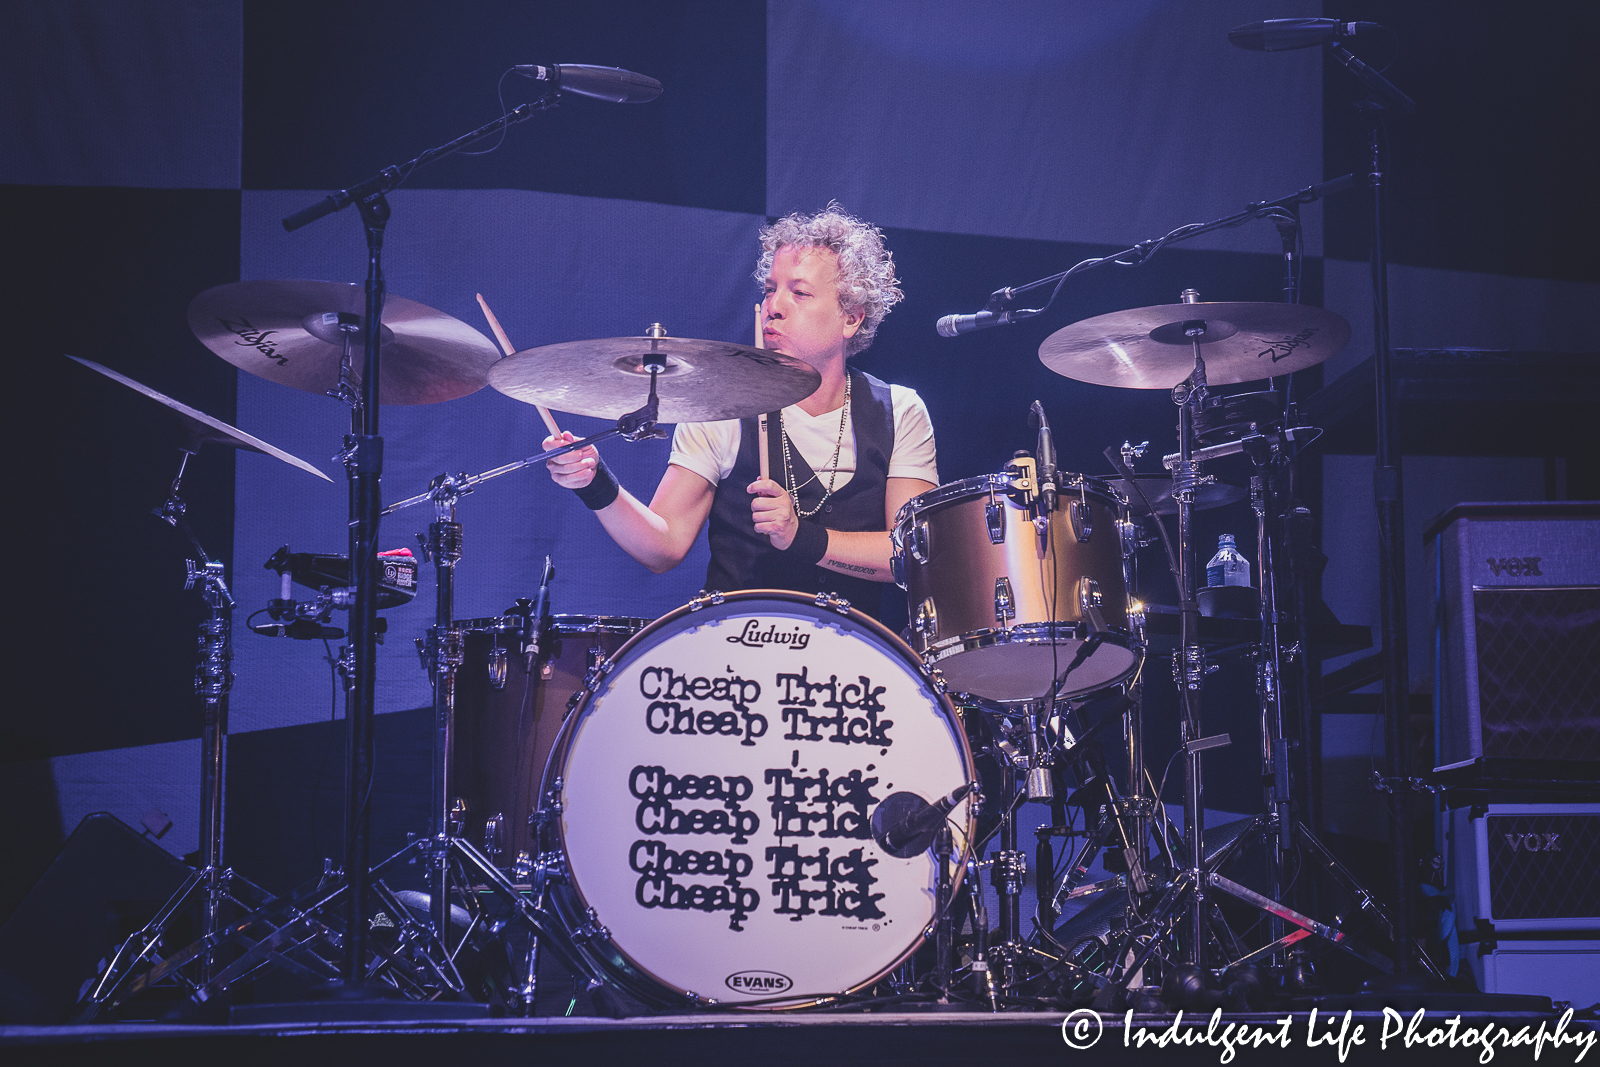 Cheap Trick drummer Daxx Nielsen playing live at Uptown Theater in Kansas City, MO on September 13, 2022.